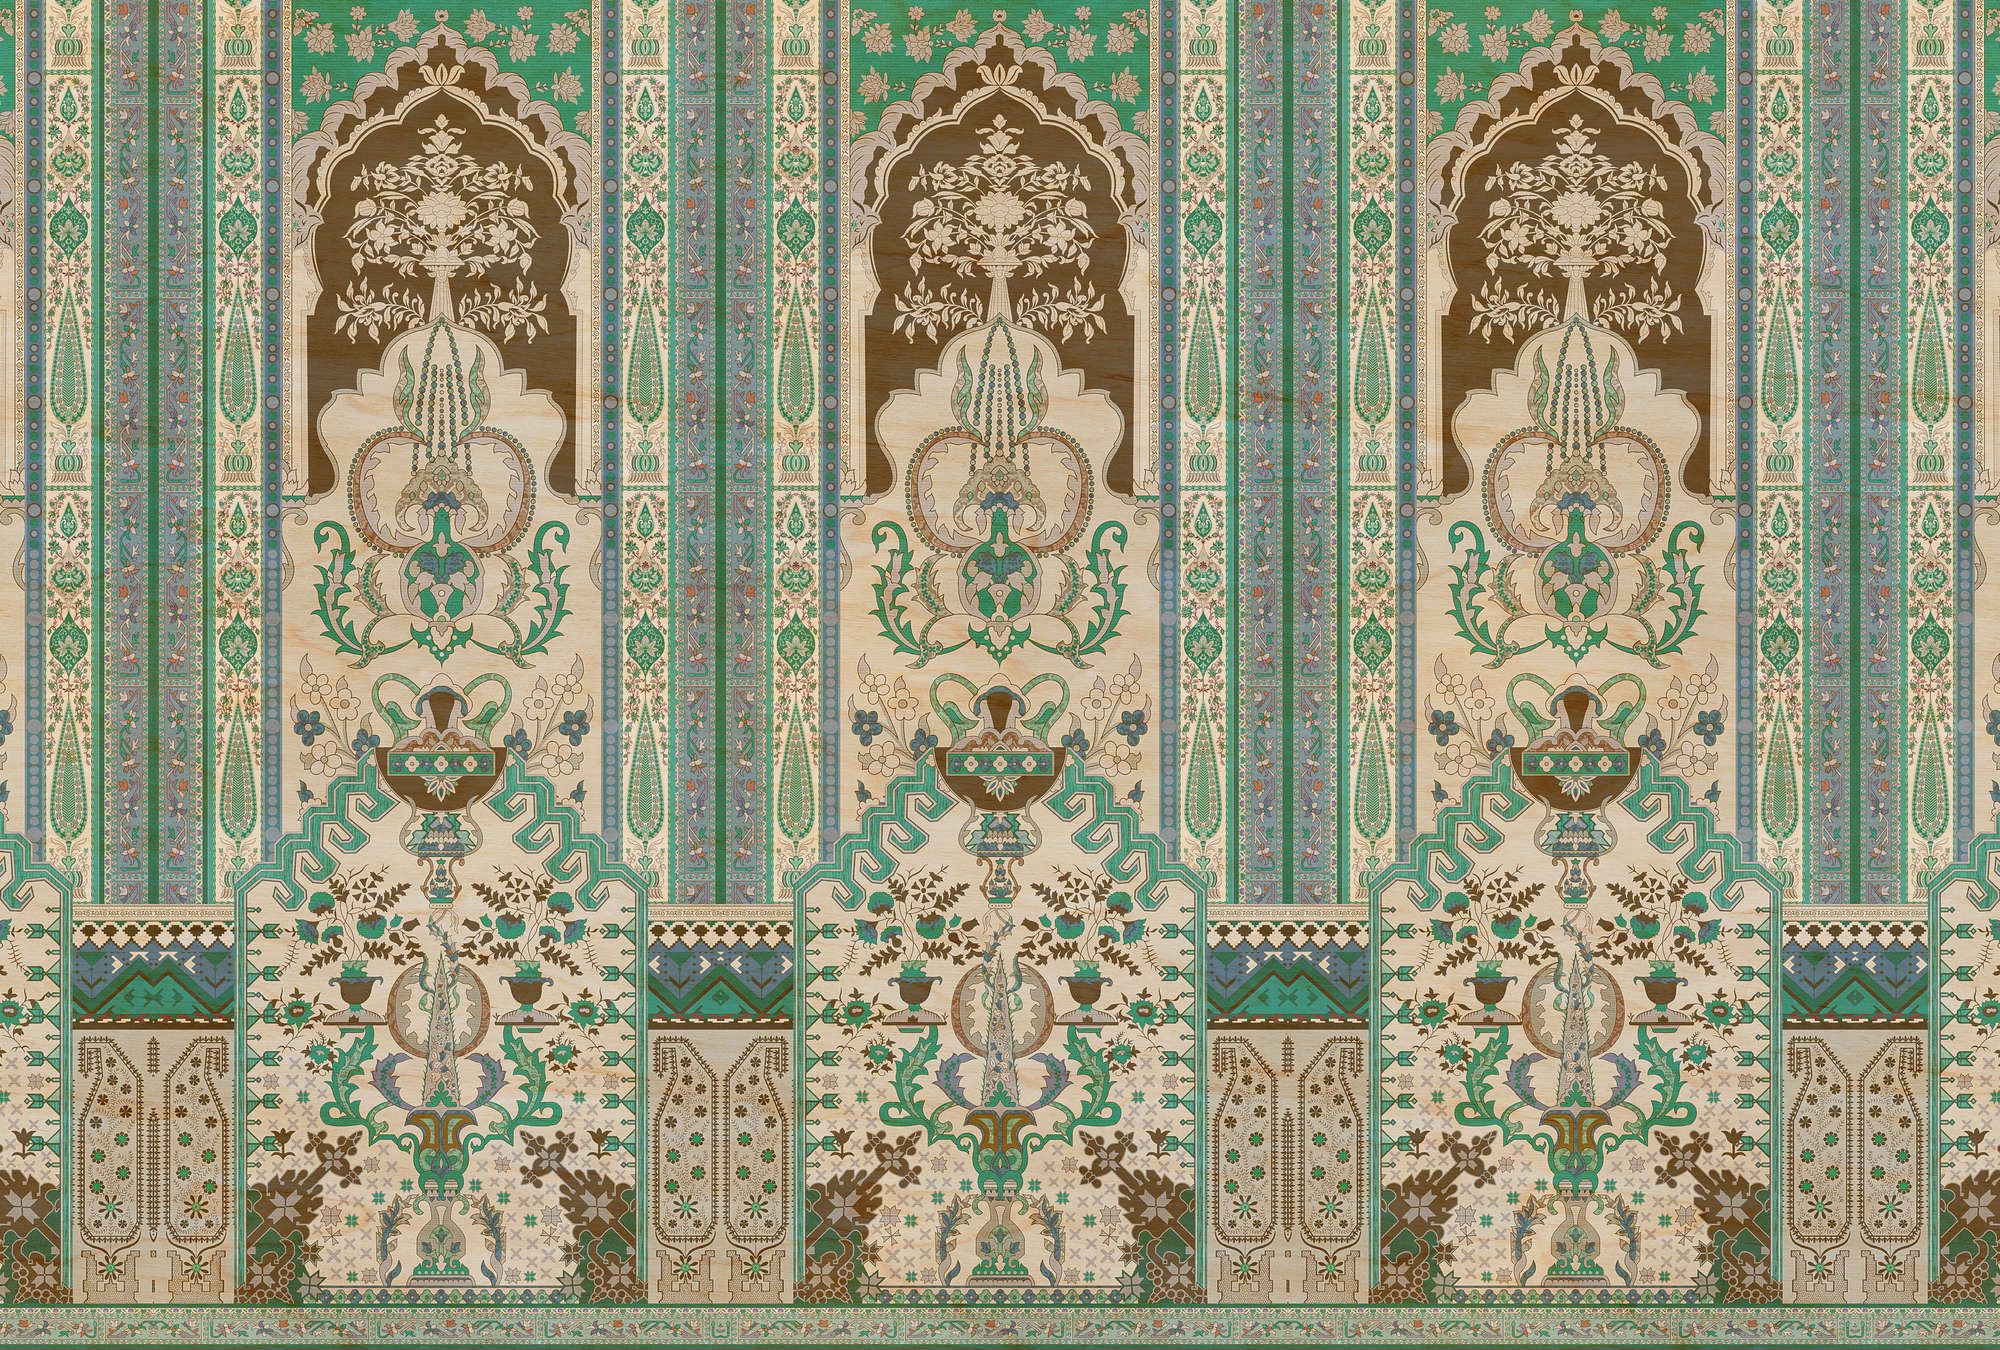             Photo wallpaper »tara« - Ornamental panelling with plywood texture - Green, Beige | Light textured non-woven
        